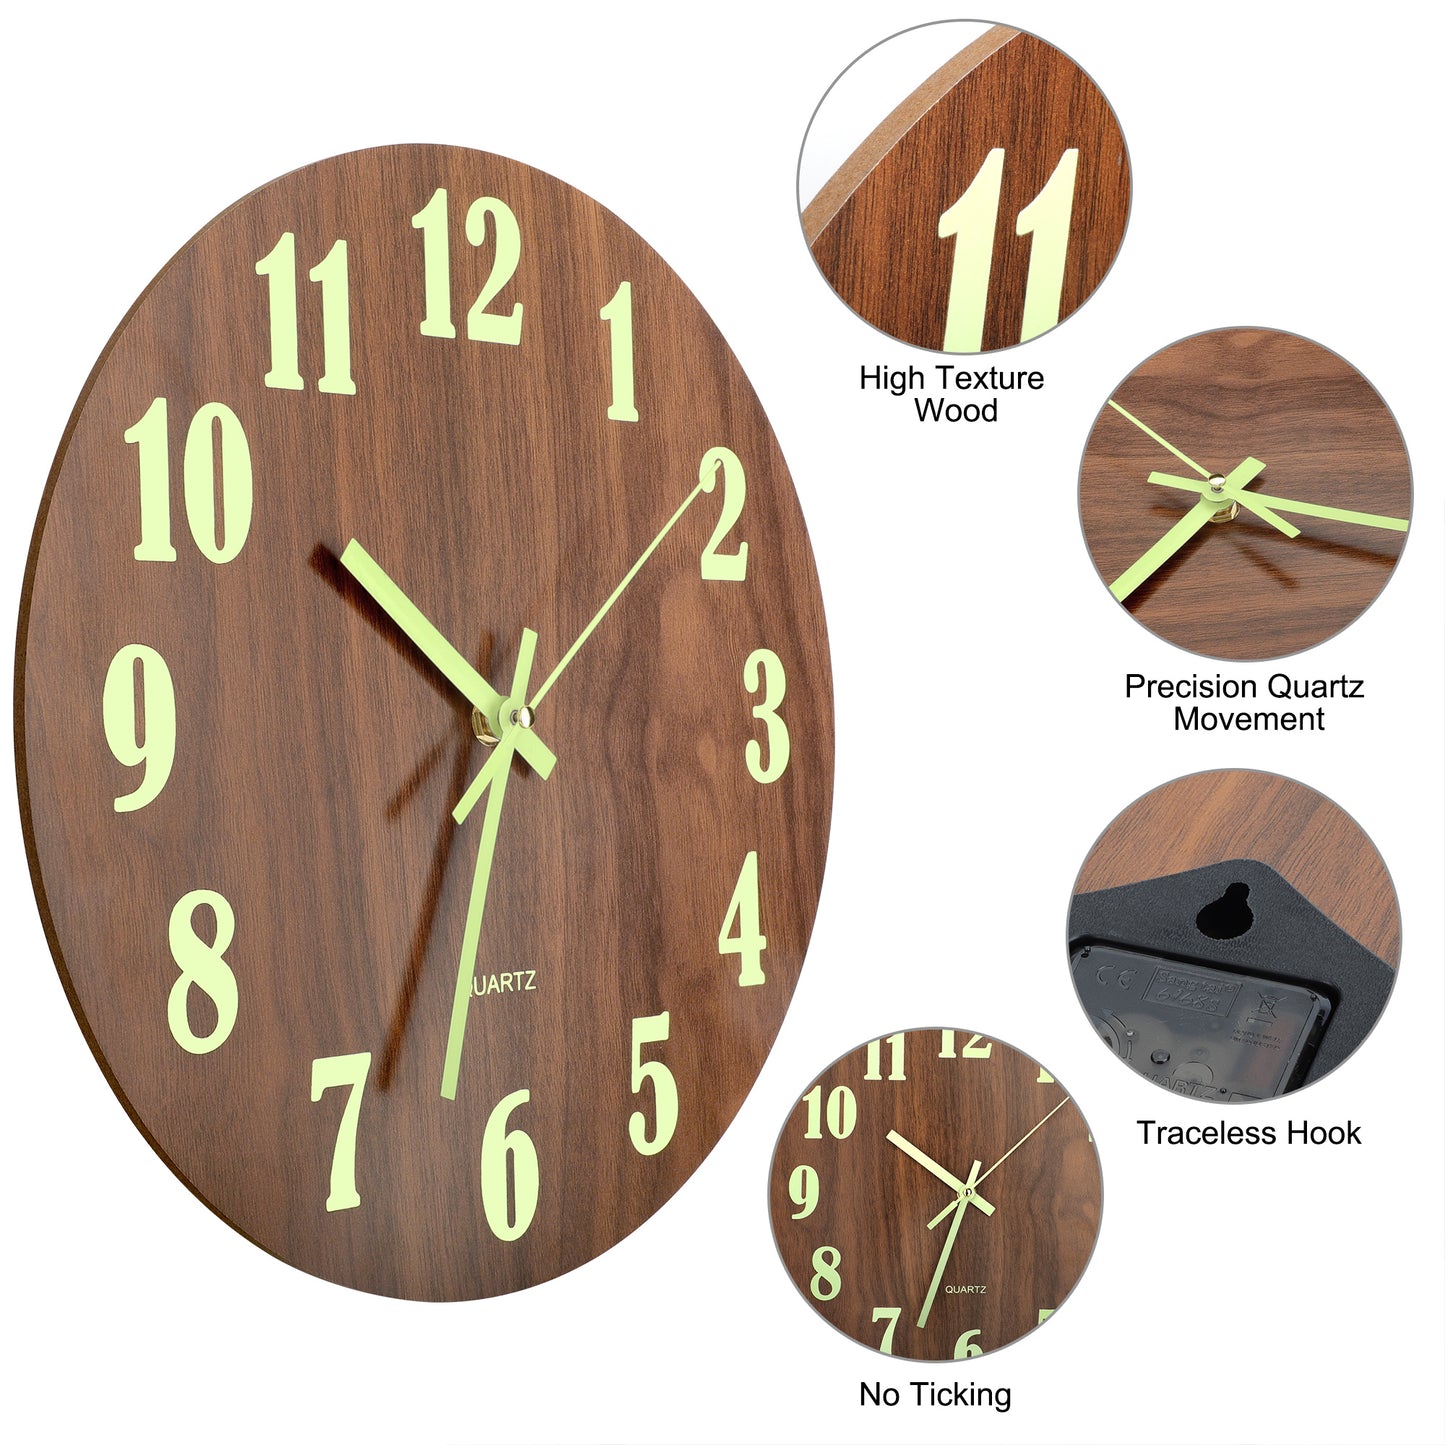 12 inch luminous wood grain round wall clock – Battery Operated Glow in the Dark Digital Decorative Wall Clock for Home, Office, and any other room in your home.(Wood Color)